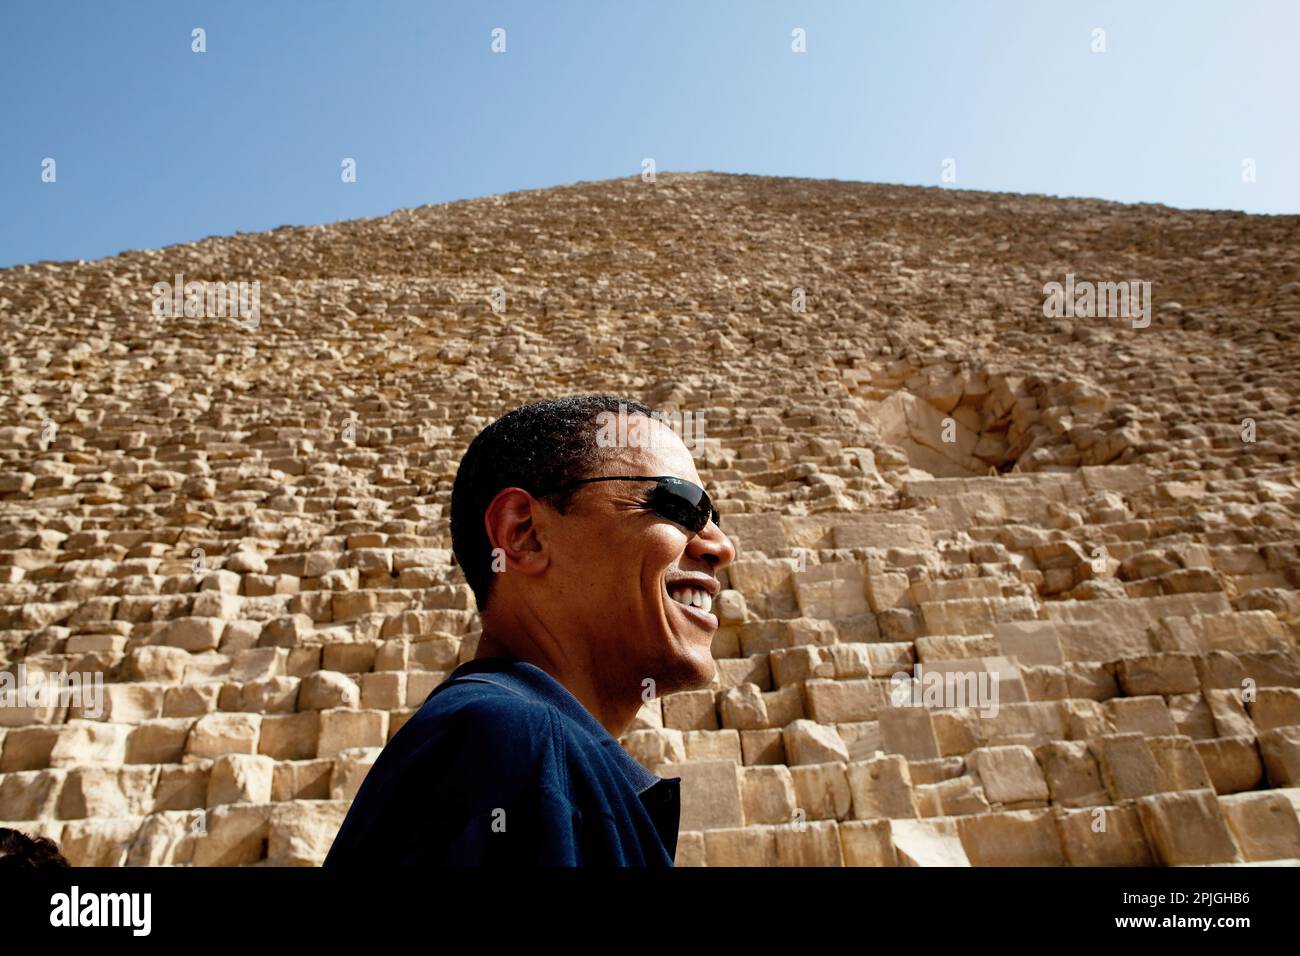 President Barack Obama tours the Pyramids of Giza in Egypt on June 4, 2009. (Official White House photo by Pete Souza) This official White House photograph is being made available for publication by news organizations and/or for personal use printing by the subject(s) of the photograph. The photograph may not be manipulated in any way or used in materials, advertisements, products, or promotions that in any way suggest approval or endorsement of the President, the First Family, or the White House. Stock Photo